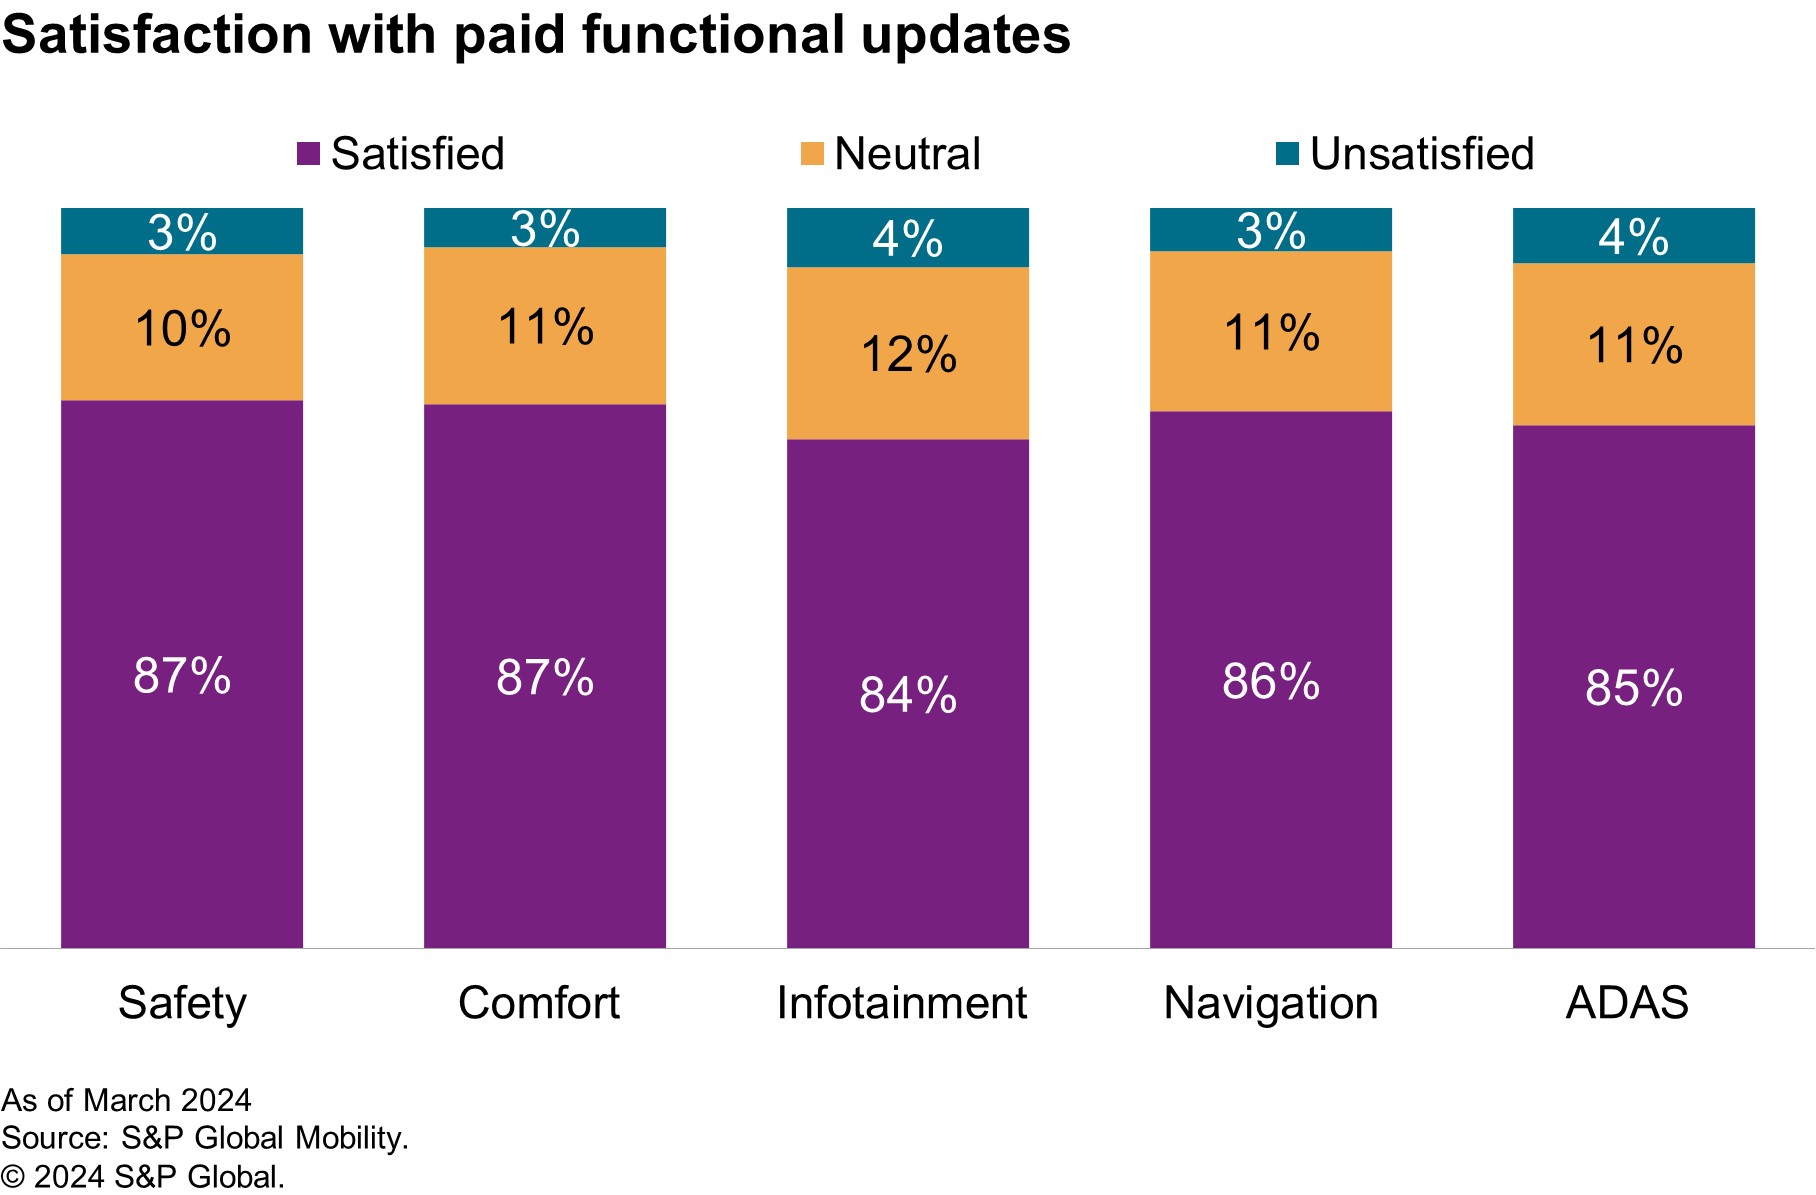 Consumers' Satisfaction with Paid Vehicle Updates